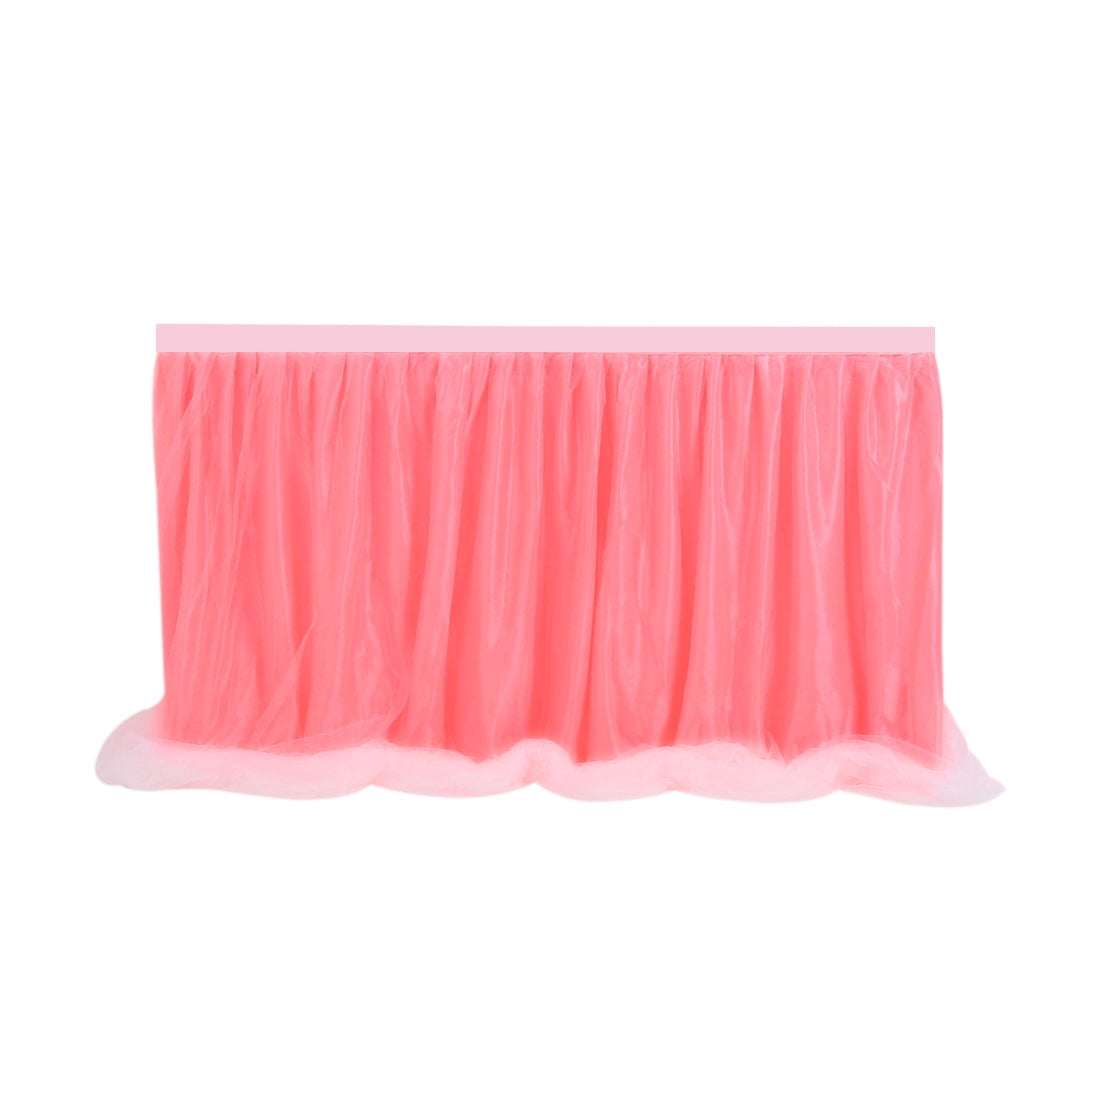 Adeeing Pink Tulle Table Skirt 6Ft 5-Layer Tutu Table Skirt for